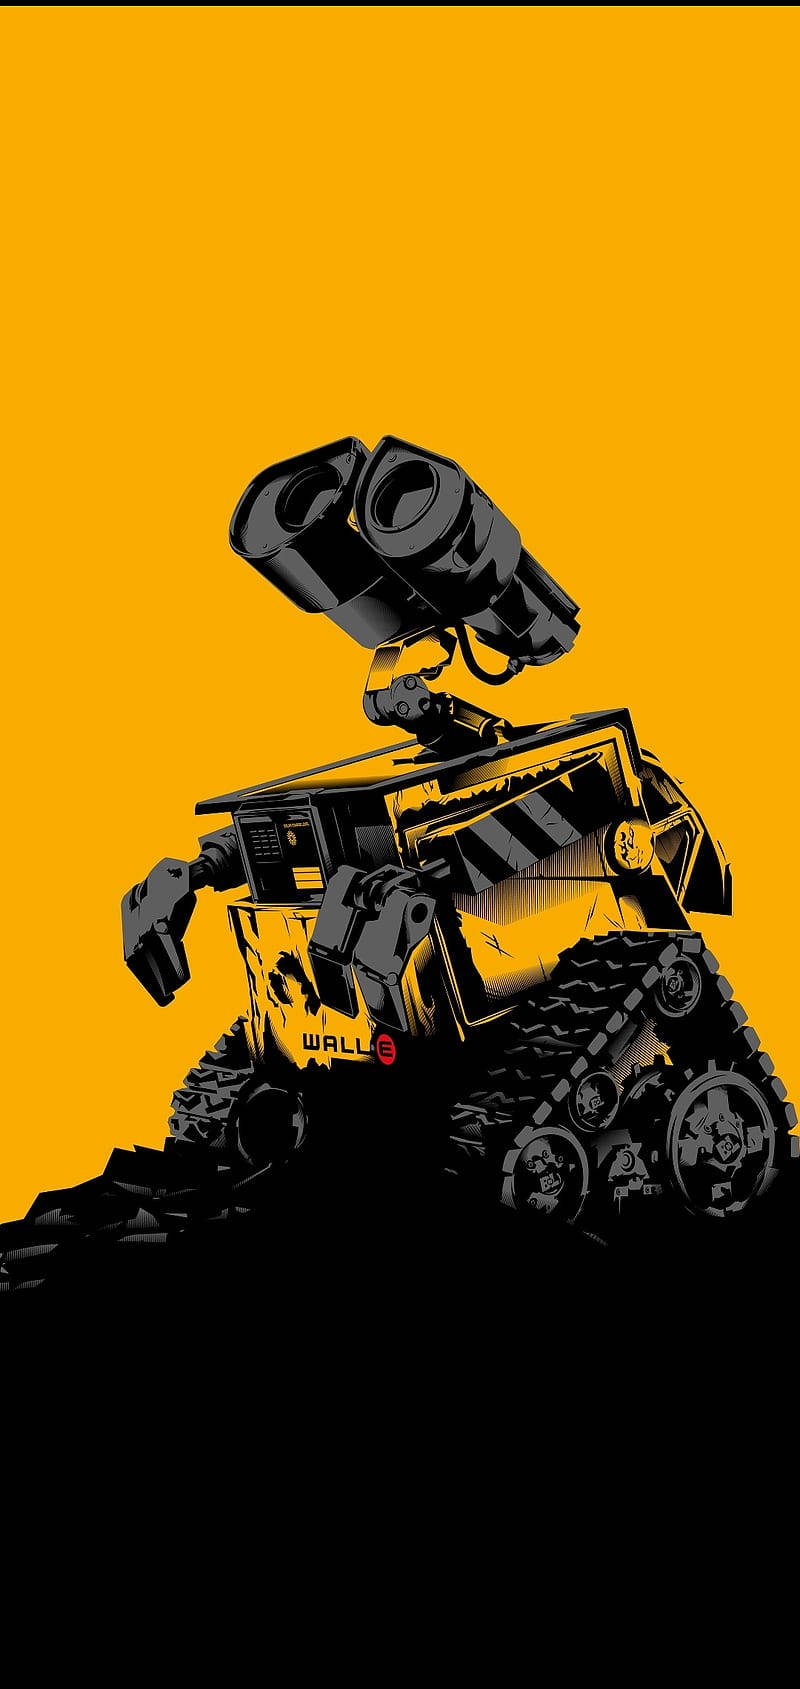 Wall-e Cool Android Vector